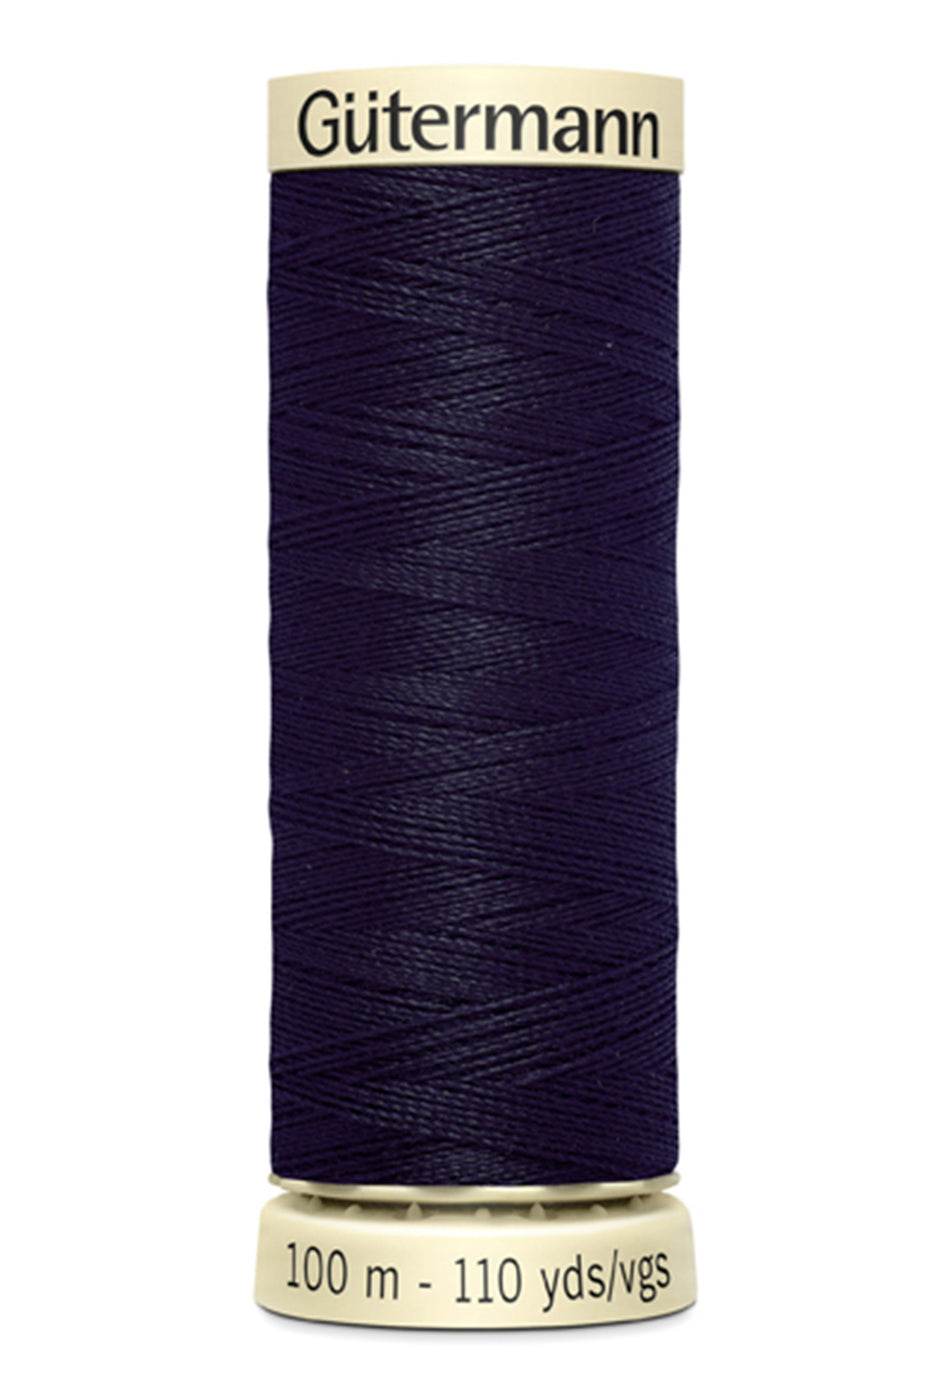 Gutermann Sew-All Polyester 280 Charcoal 100m/110yd